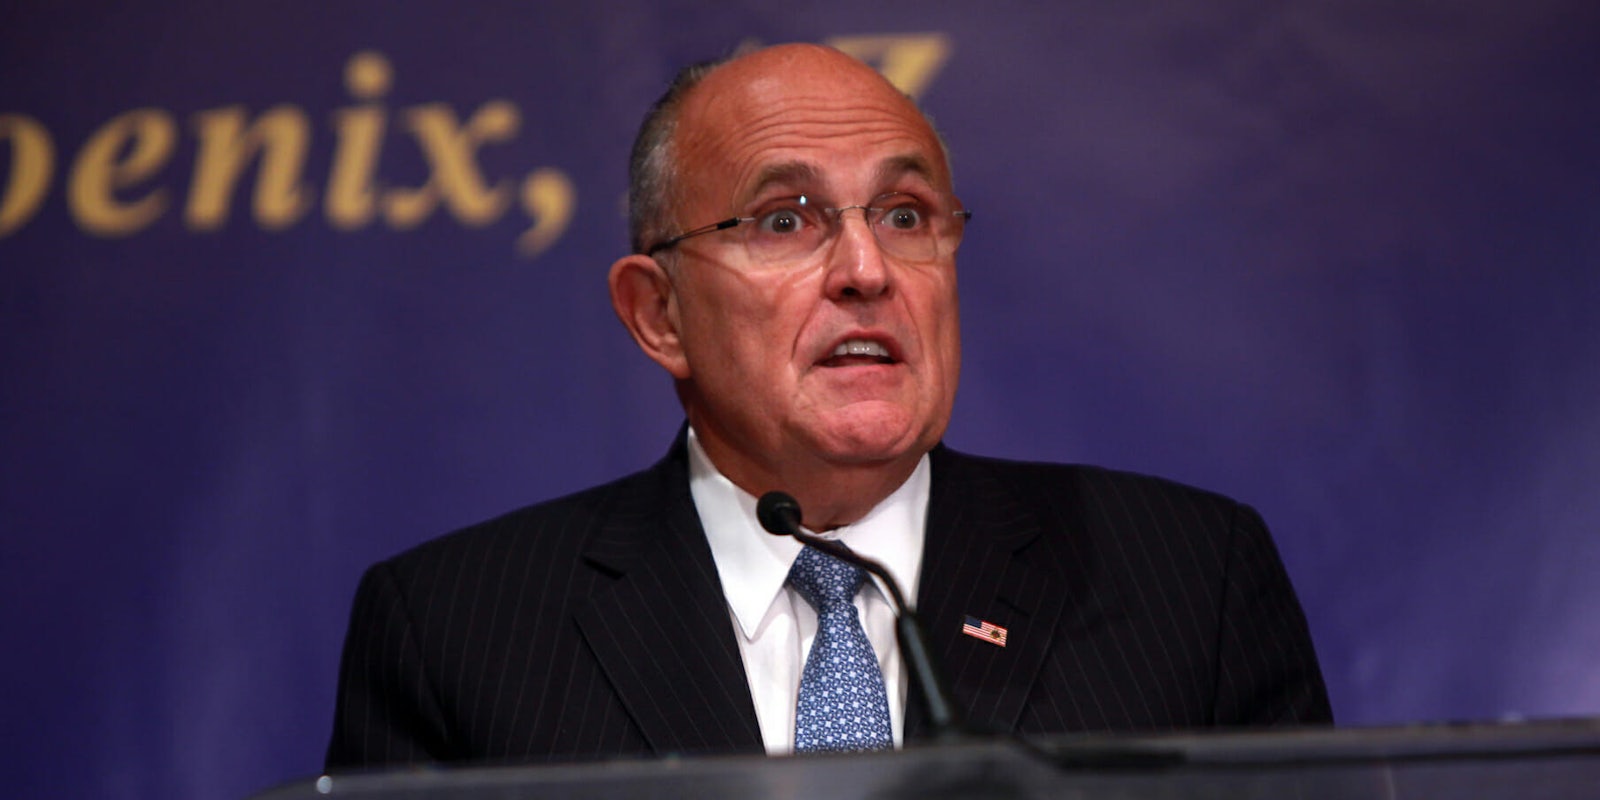 Rudy Giuliani, a staunch supporter of President Donald Trump, will be joining his legal team with the goal of negotiating 'an end' to the ongoing probe by Special Counsel Robert Mueller, according to a new report. 